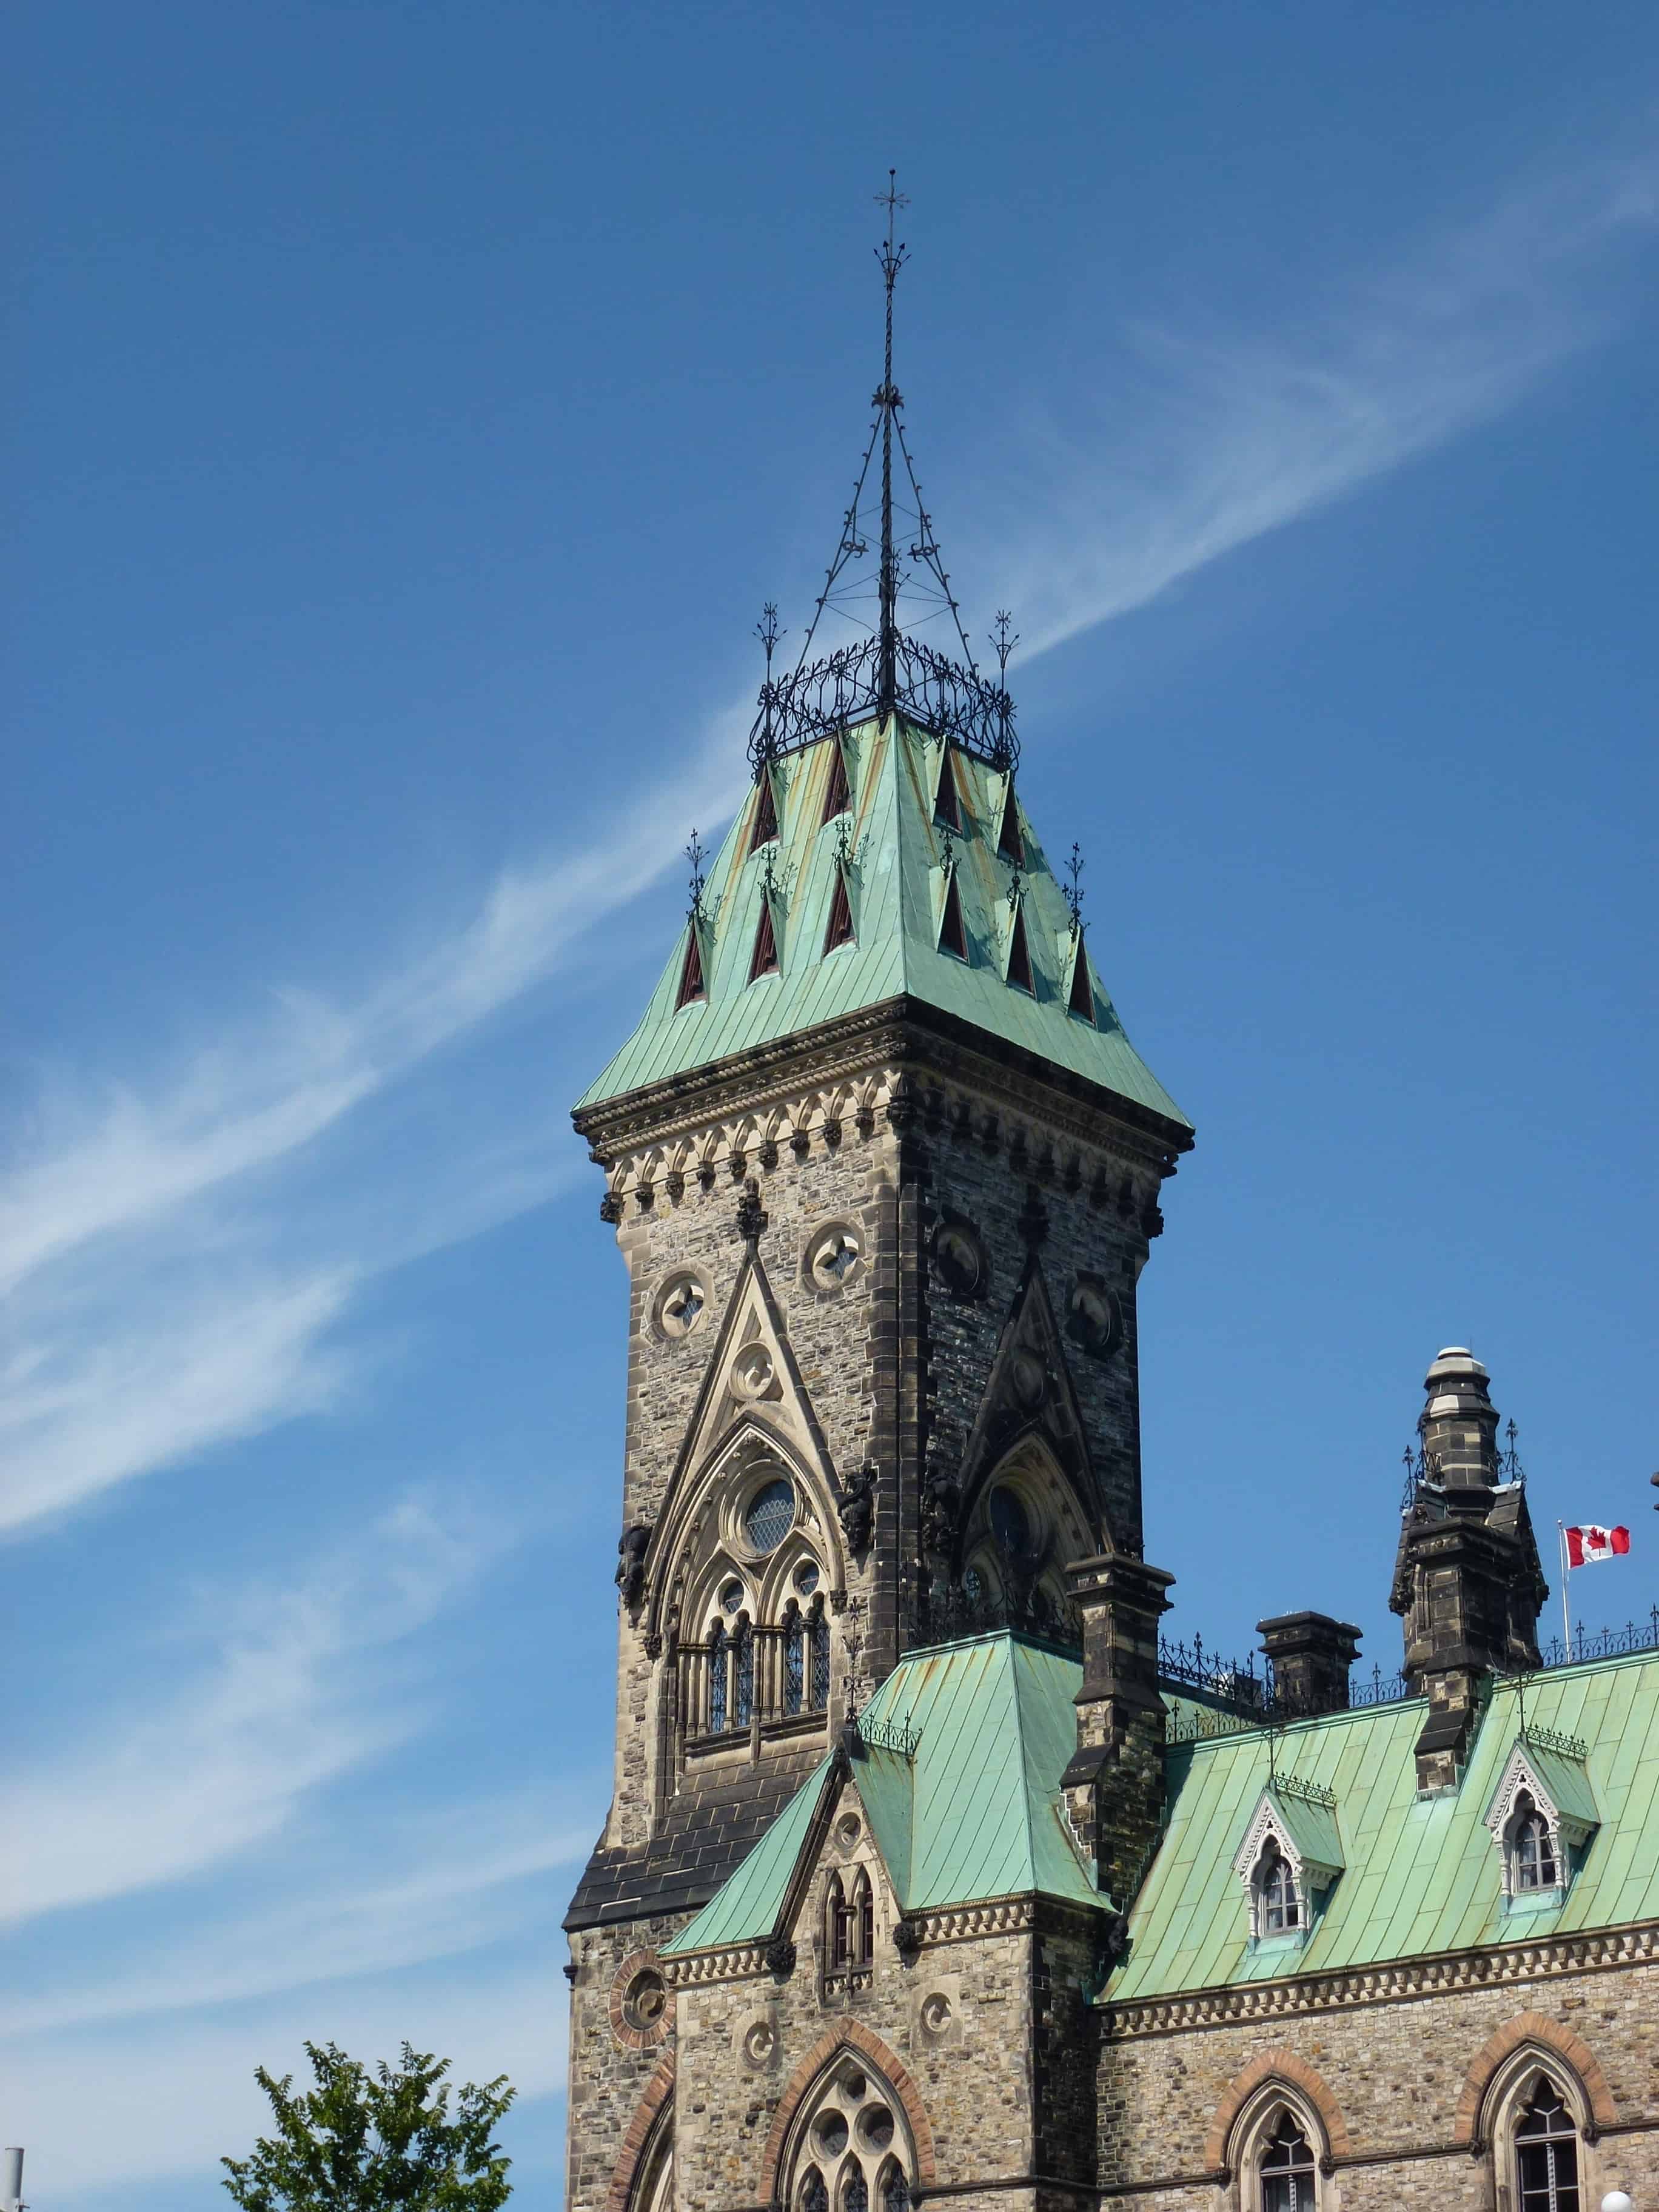 Tower at East Block at Parliament Hill in Ottawa, Ontario, Canada